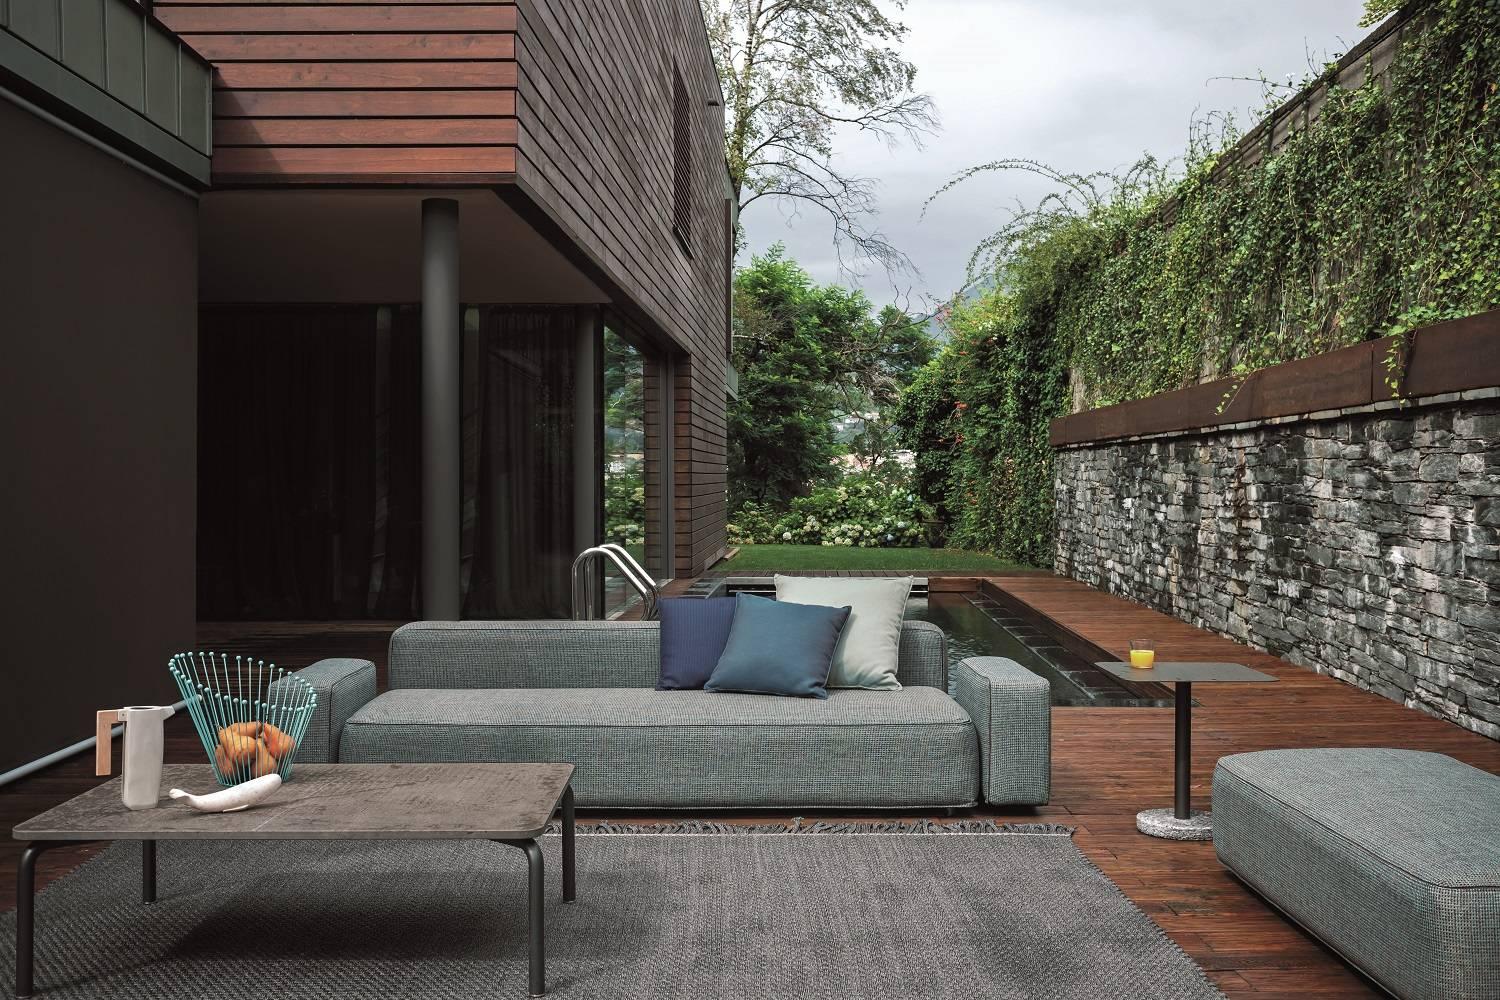 Overview:
Dandy is the new revolutionary outdoor system by Roda, which includes all the functions of a textile sofa for indoor use, so intimate and familiar, in a completely new proposal for outdoor. Designed by the unmistakable talent of Rodolfo